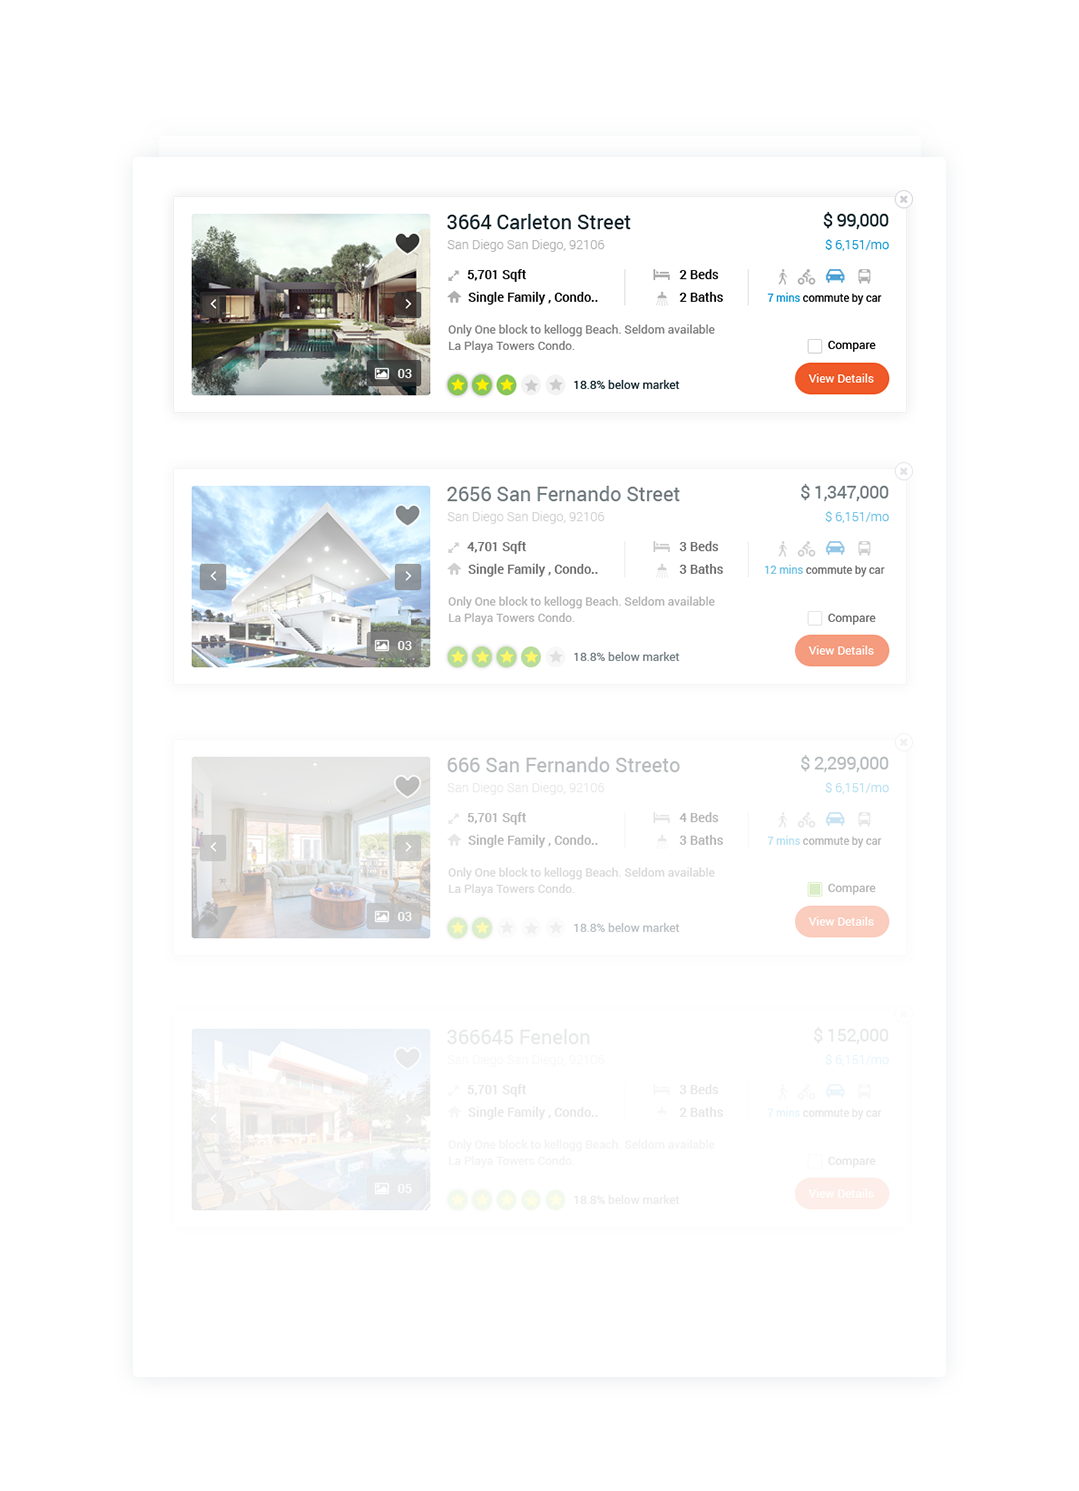 Browse and compare real estate listings in real-time with the homeza web platform